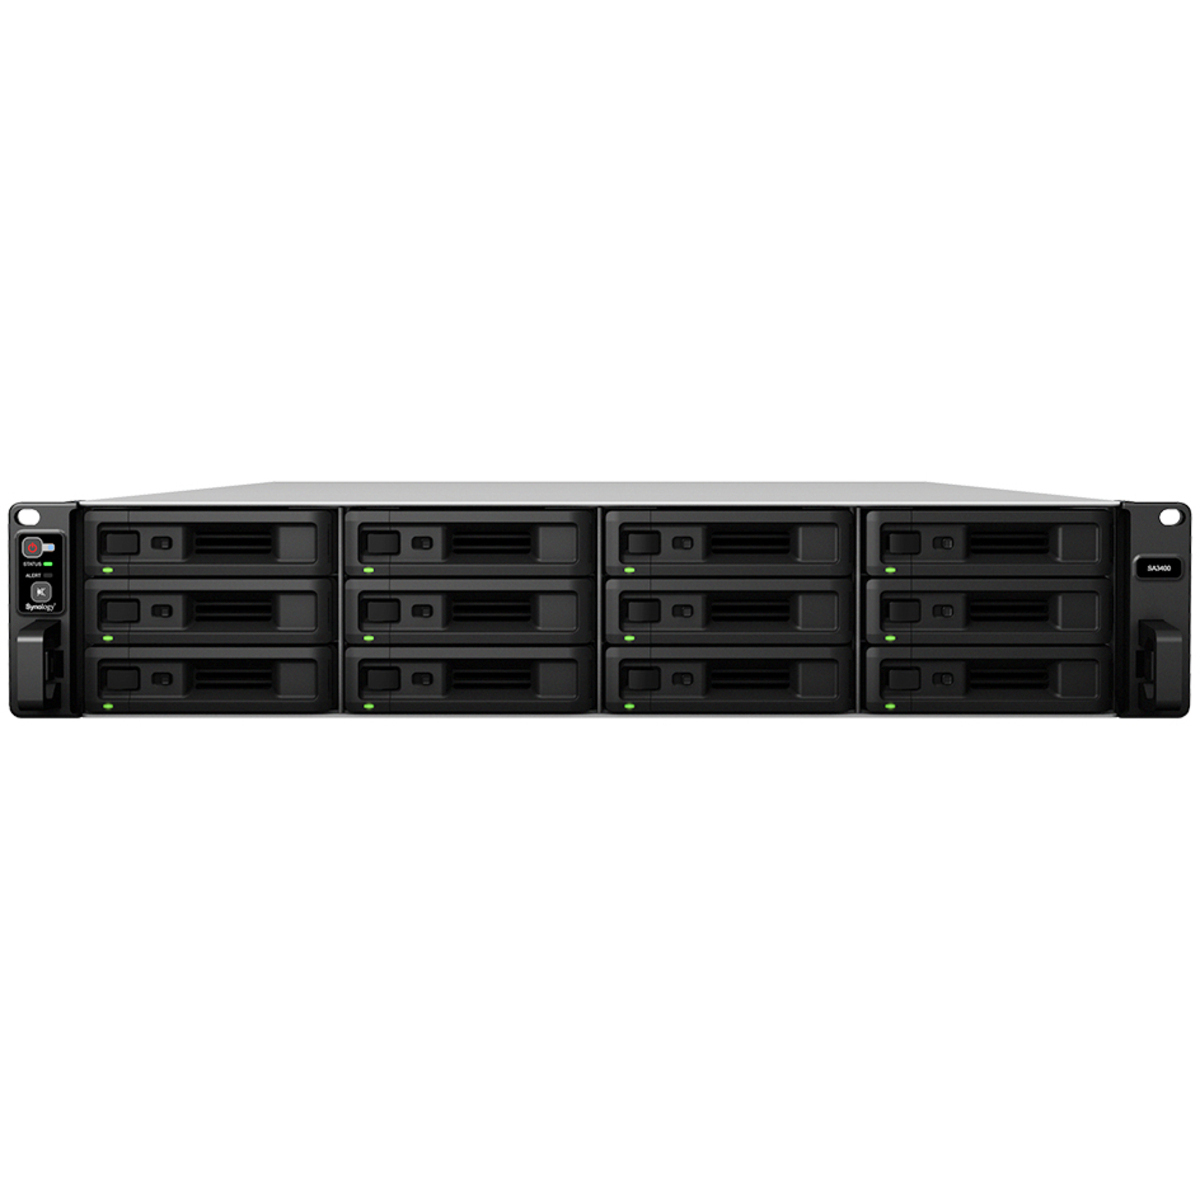 buy $10745 Synology RackStation SA3400 96tb RackMount NAS - Network Attached Storage Device 12x8000gb Seagate EXOS ST8000NM000A 3.5 7200rpm SATA 6Gb/s HDD ENTERPRISE Class Drives Installed - Burn-In Tested - nas headquarters buy network attached storage server device das new raid-5 free shipping usa christmas new year holiday sale RackStation SA3400